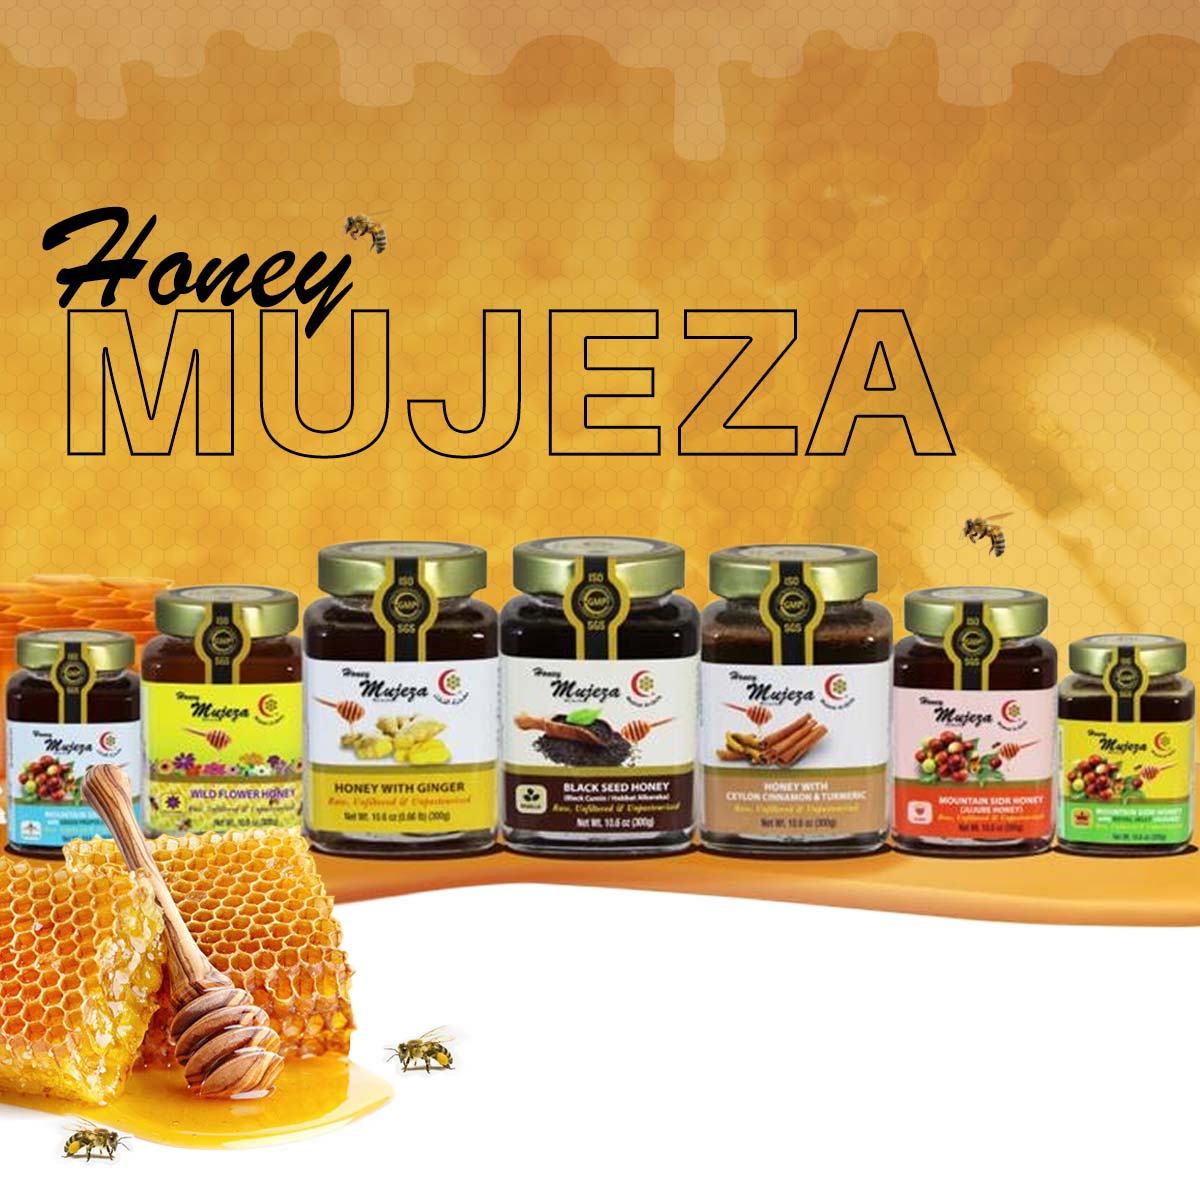 Mujeza Honey Products available in our store - Best Honey products ever - order Now!